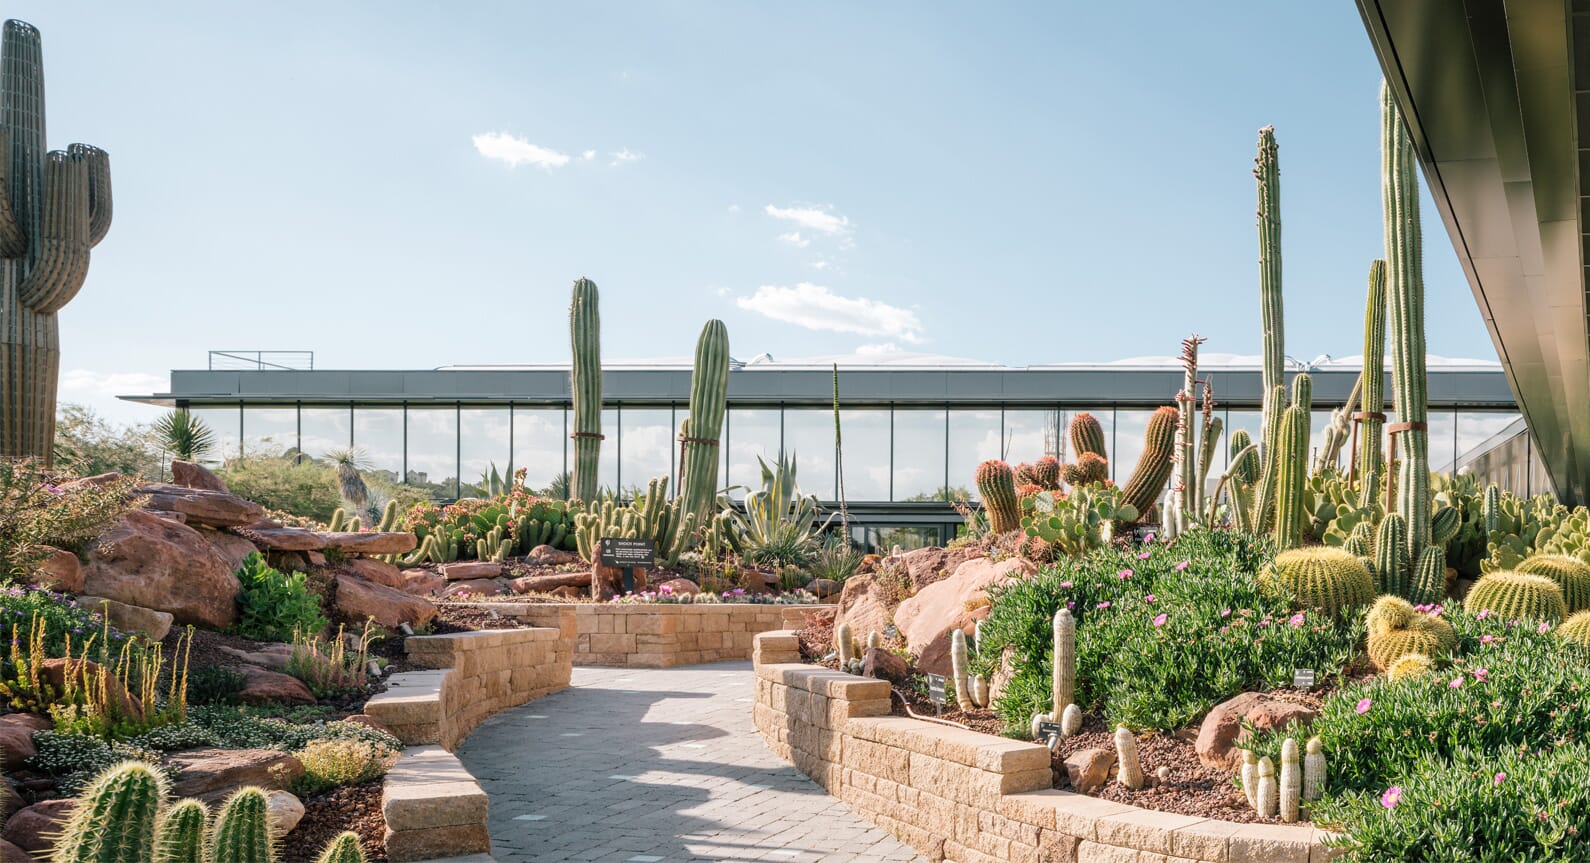 Madrid’s Spectacular Desert City Complex Celebrates All Things Cacti